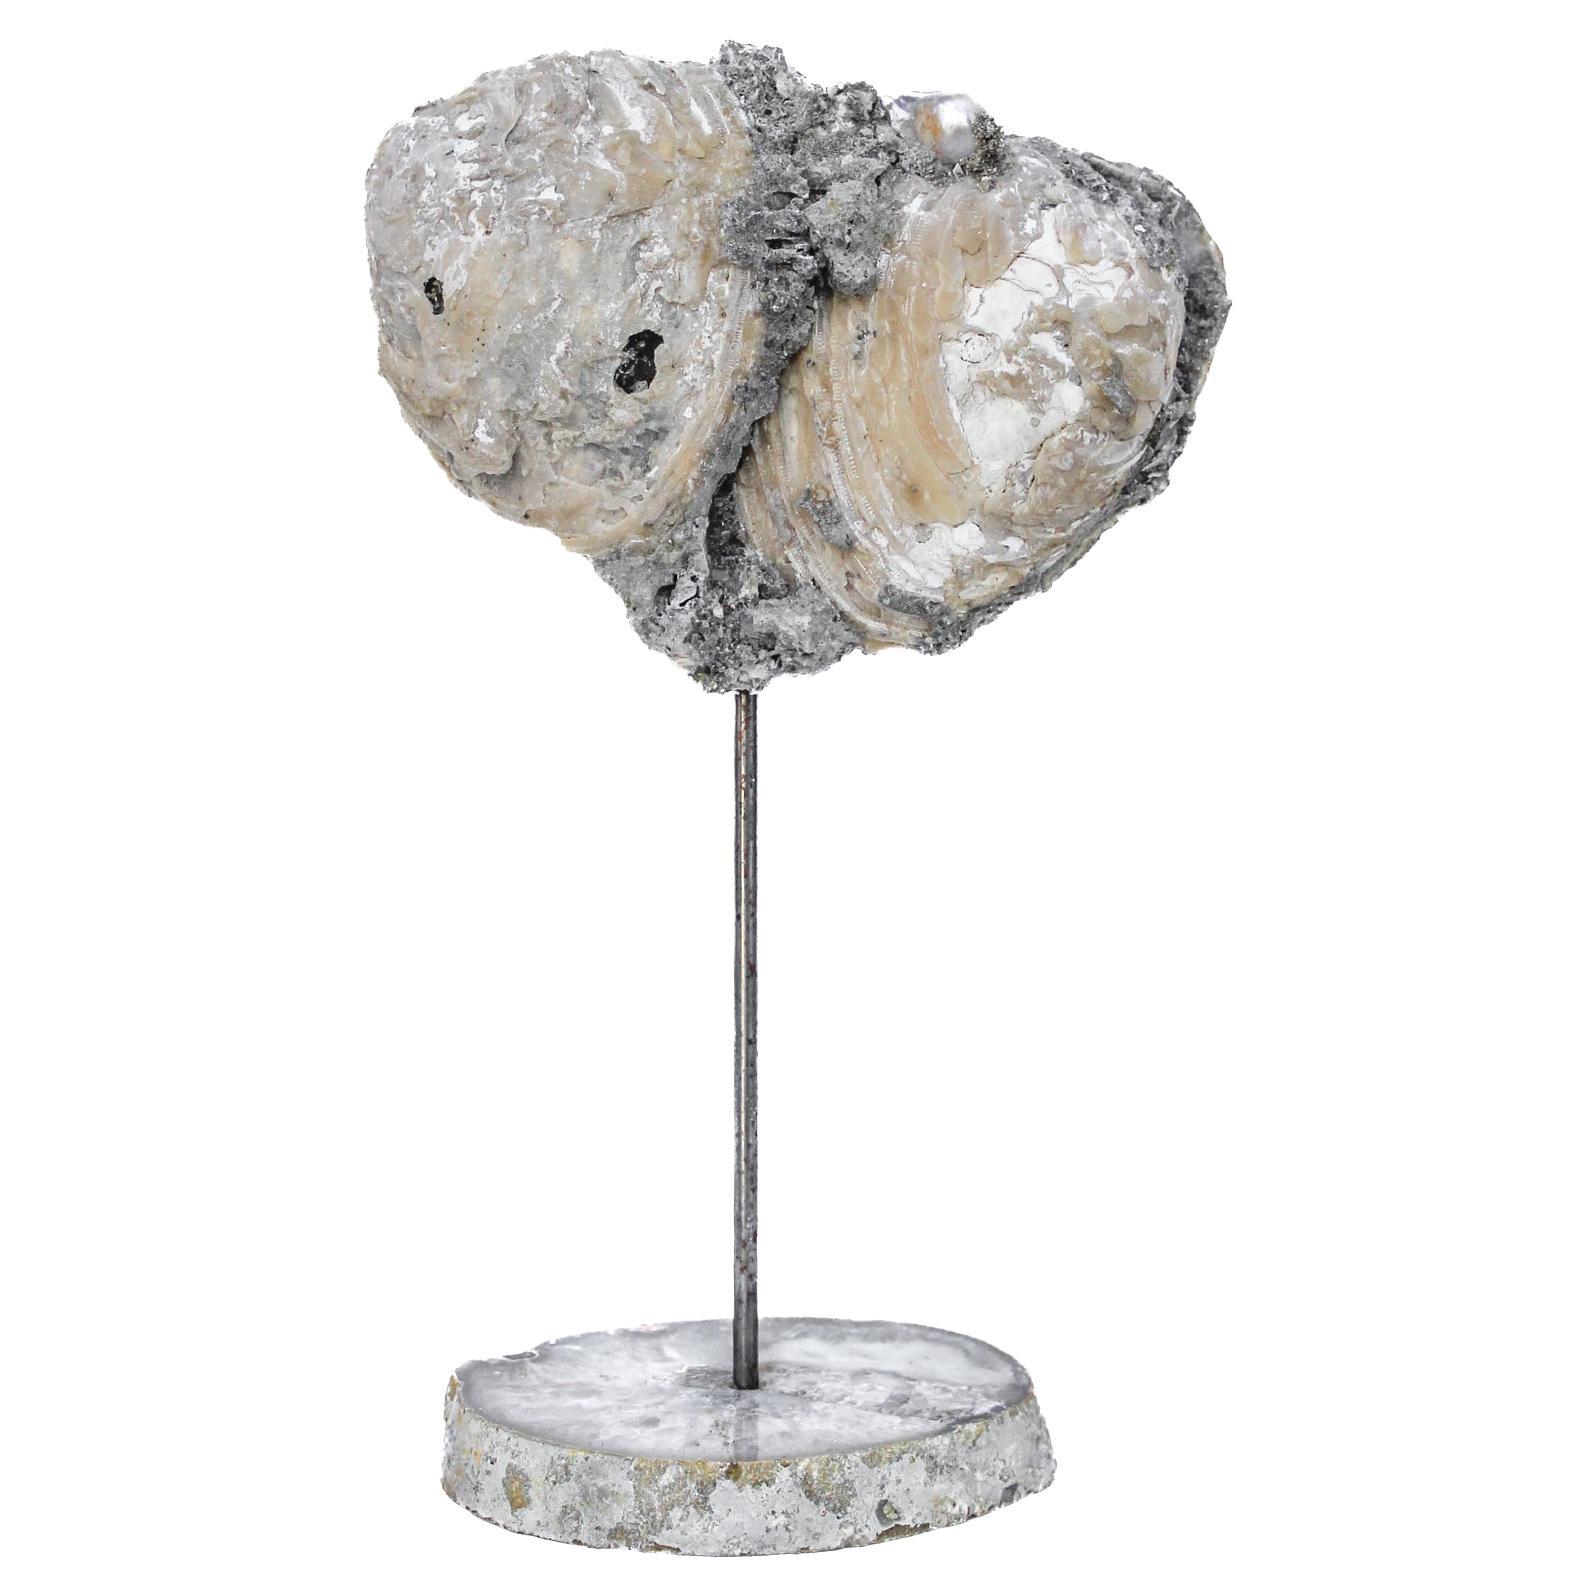 Heart-Shaped Fossil Clamshell with Baroque Pearls on a Polished Agate Base